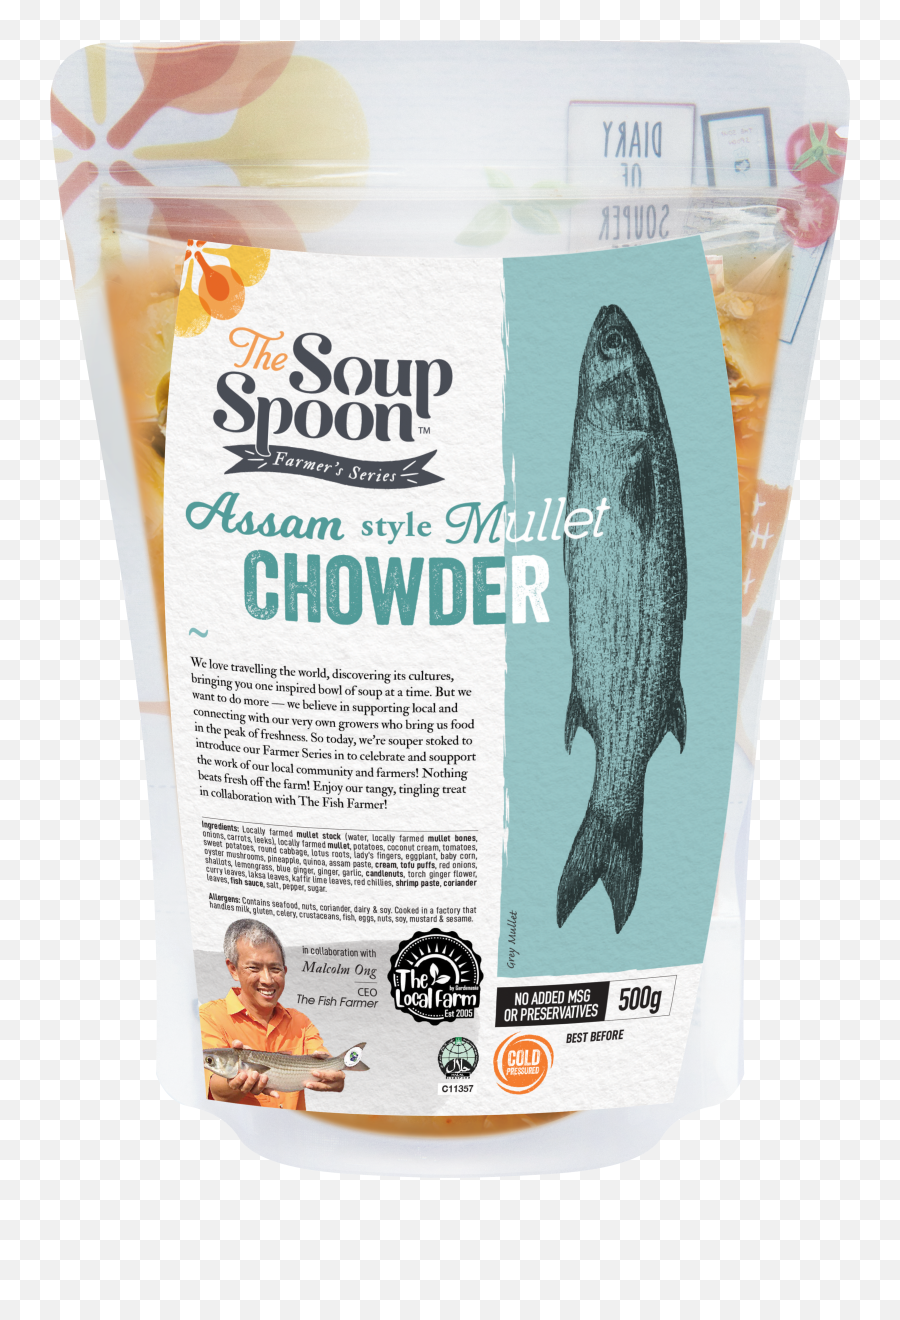 Sg Assam - Style Mullet Chowder Page Png,Chowder Png